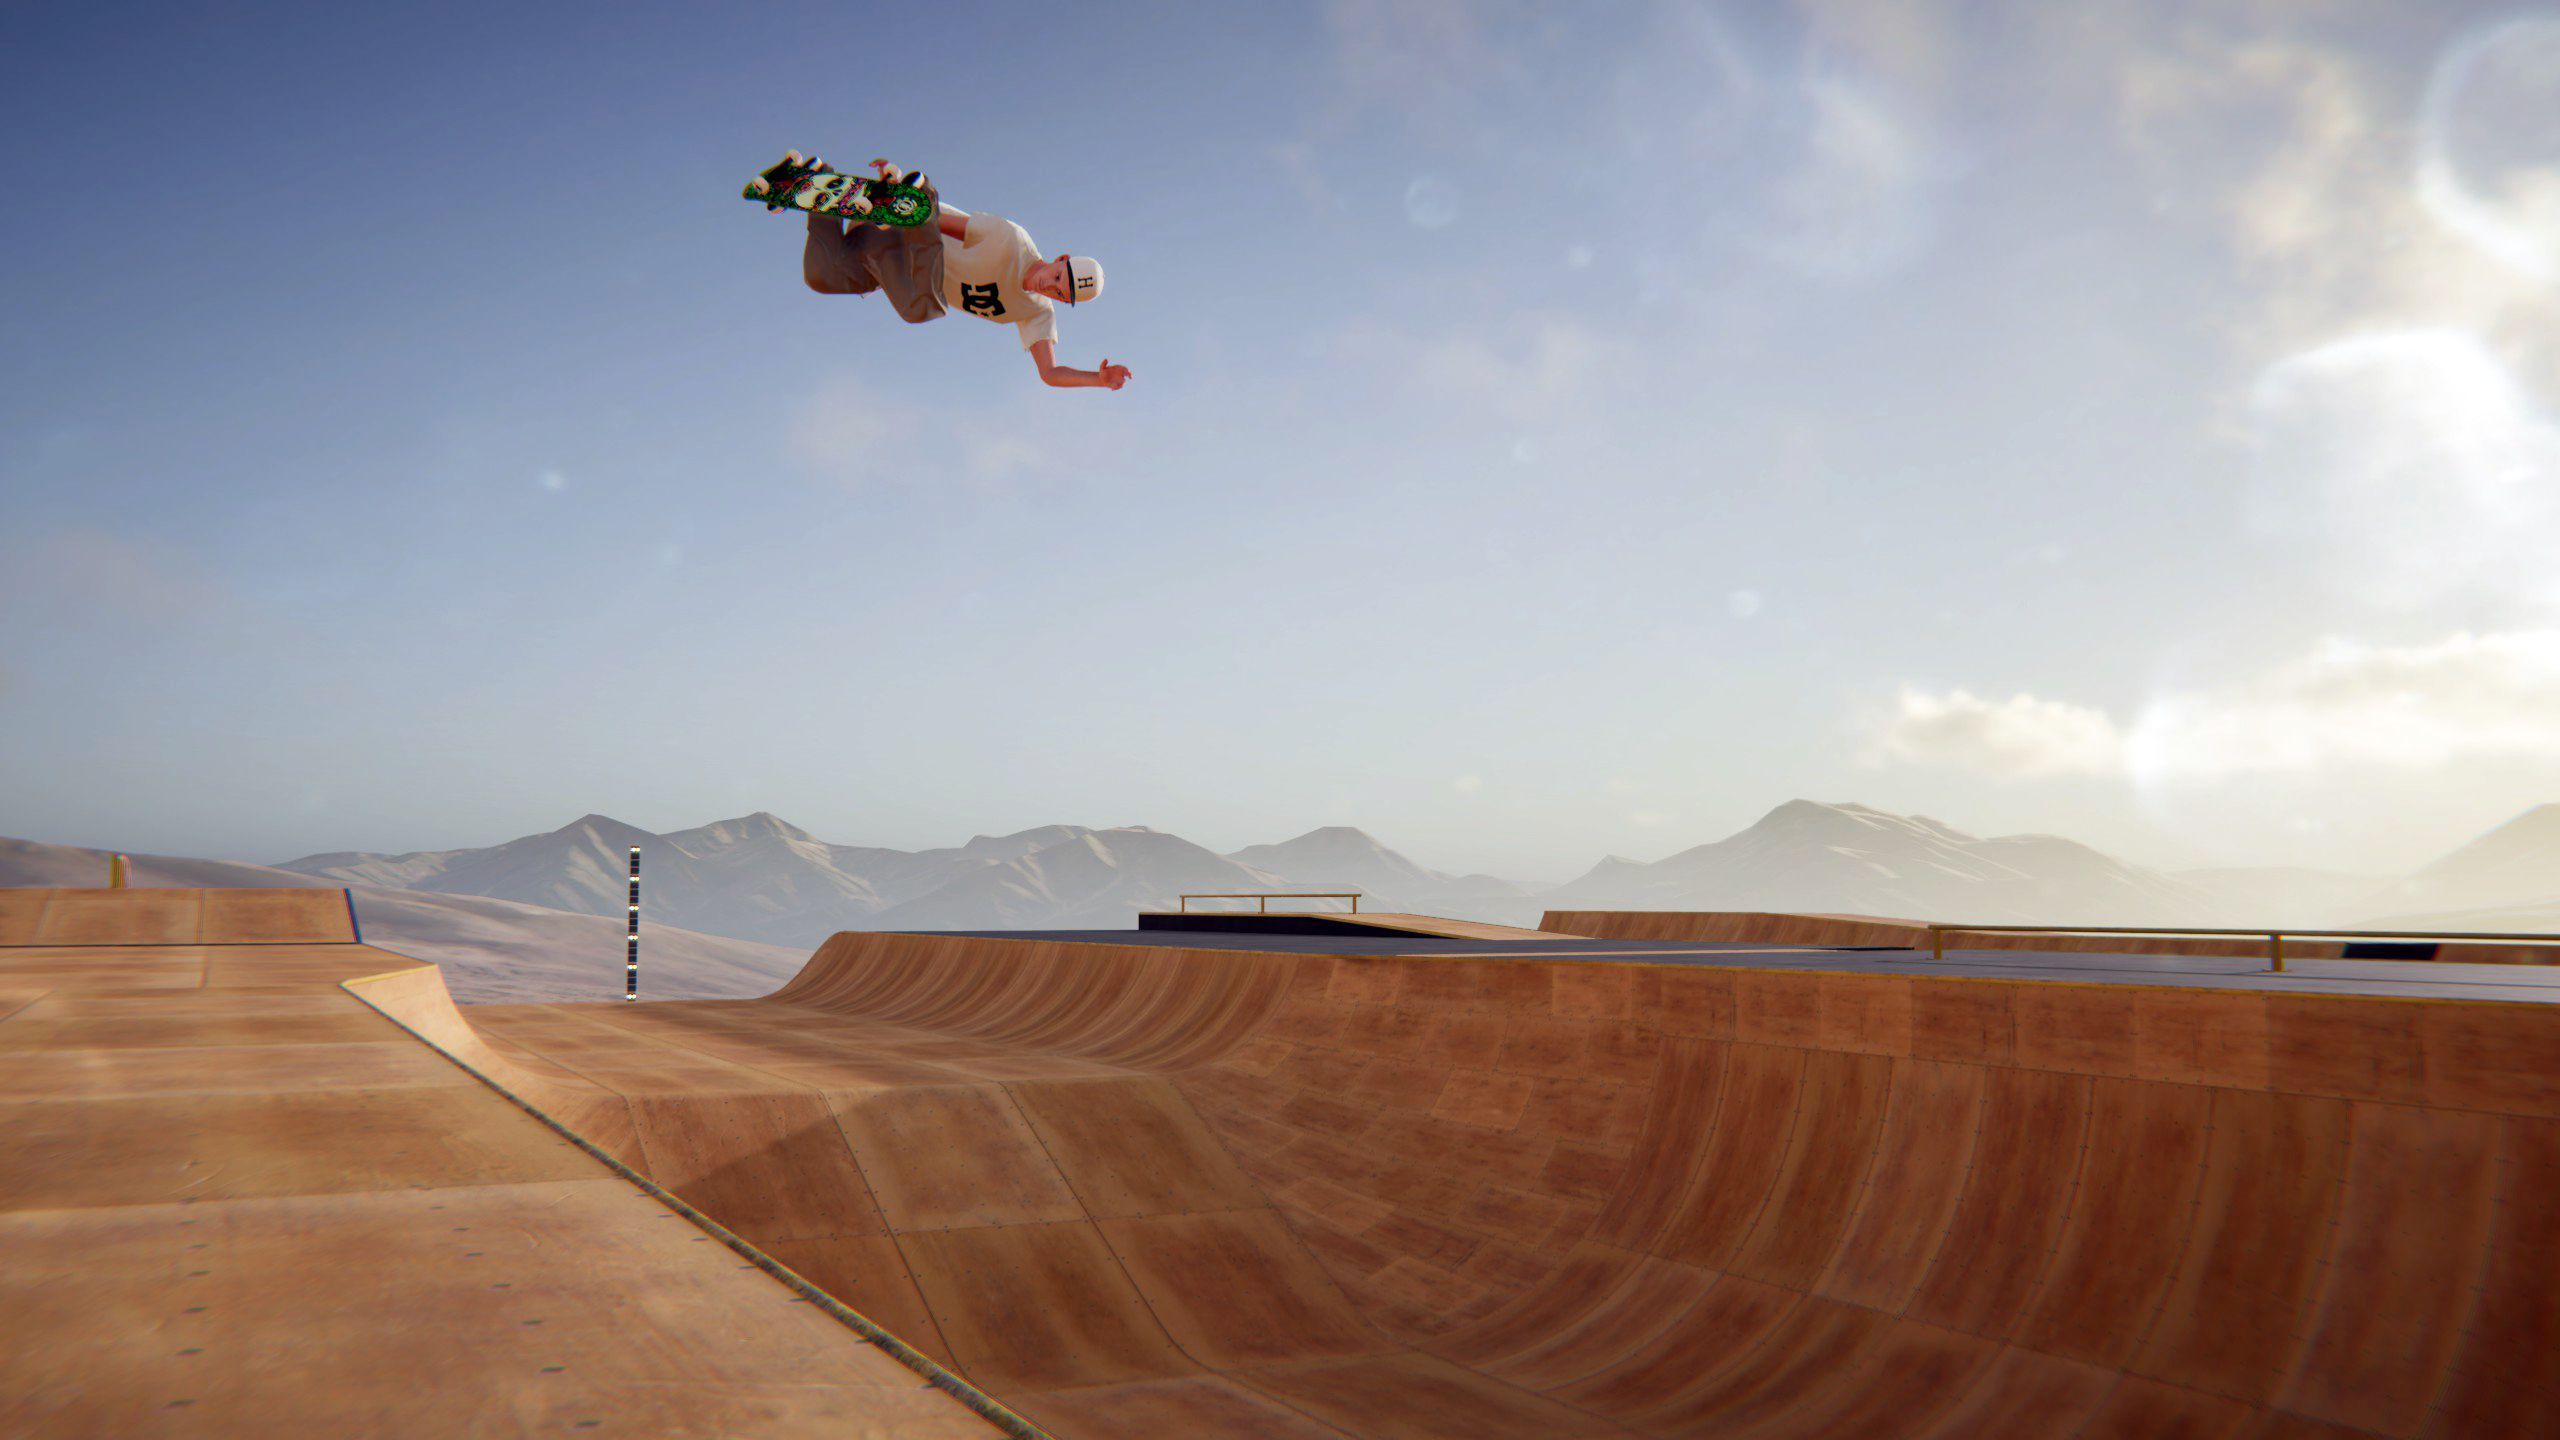 Skater XL player performing a grab above a vert